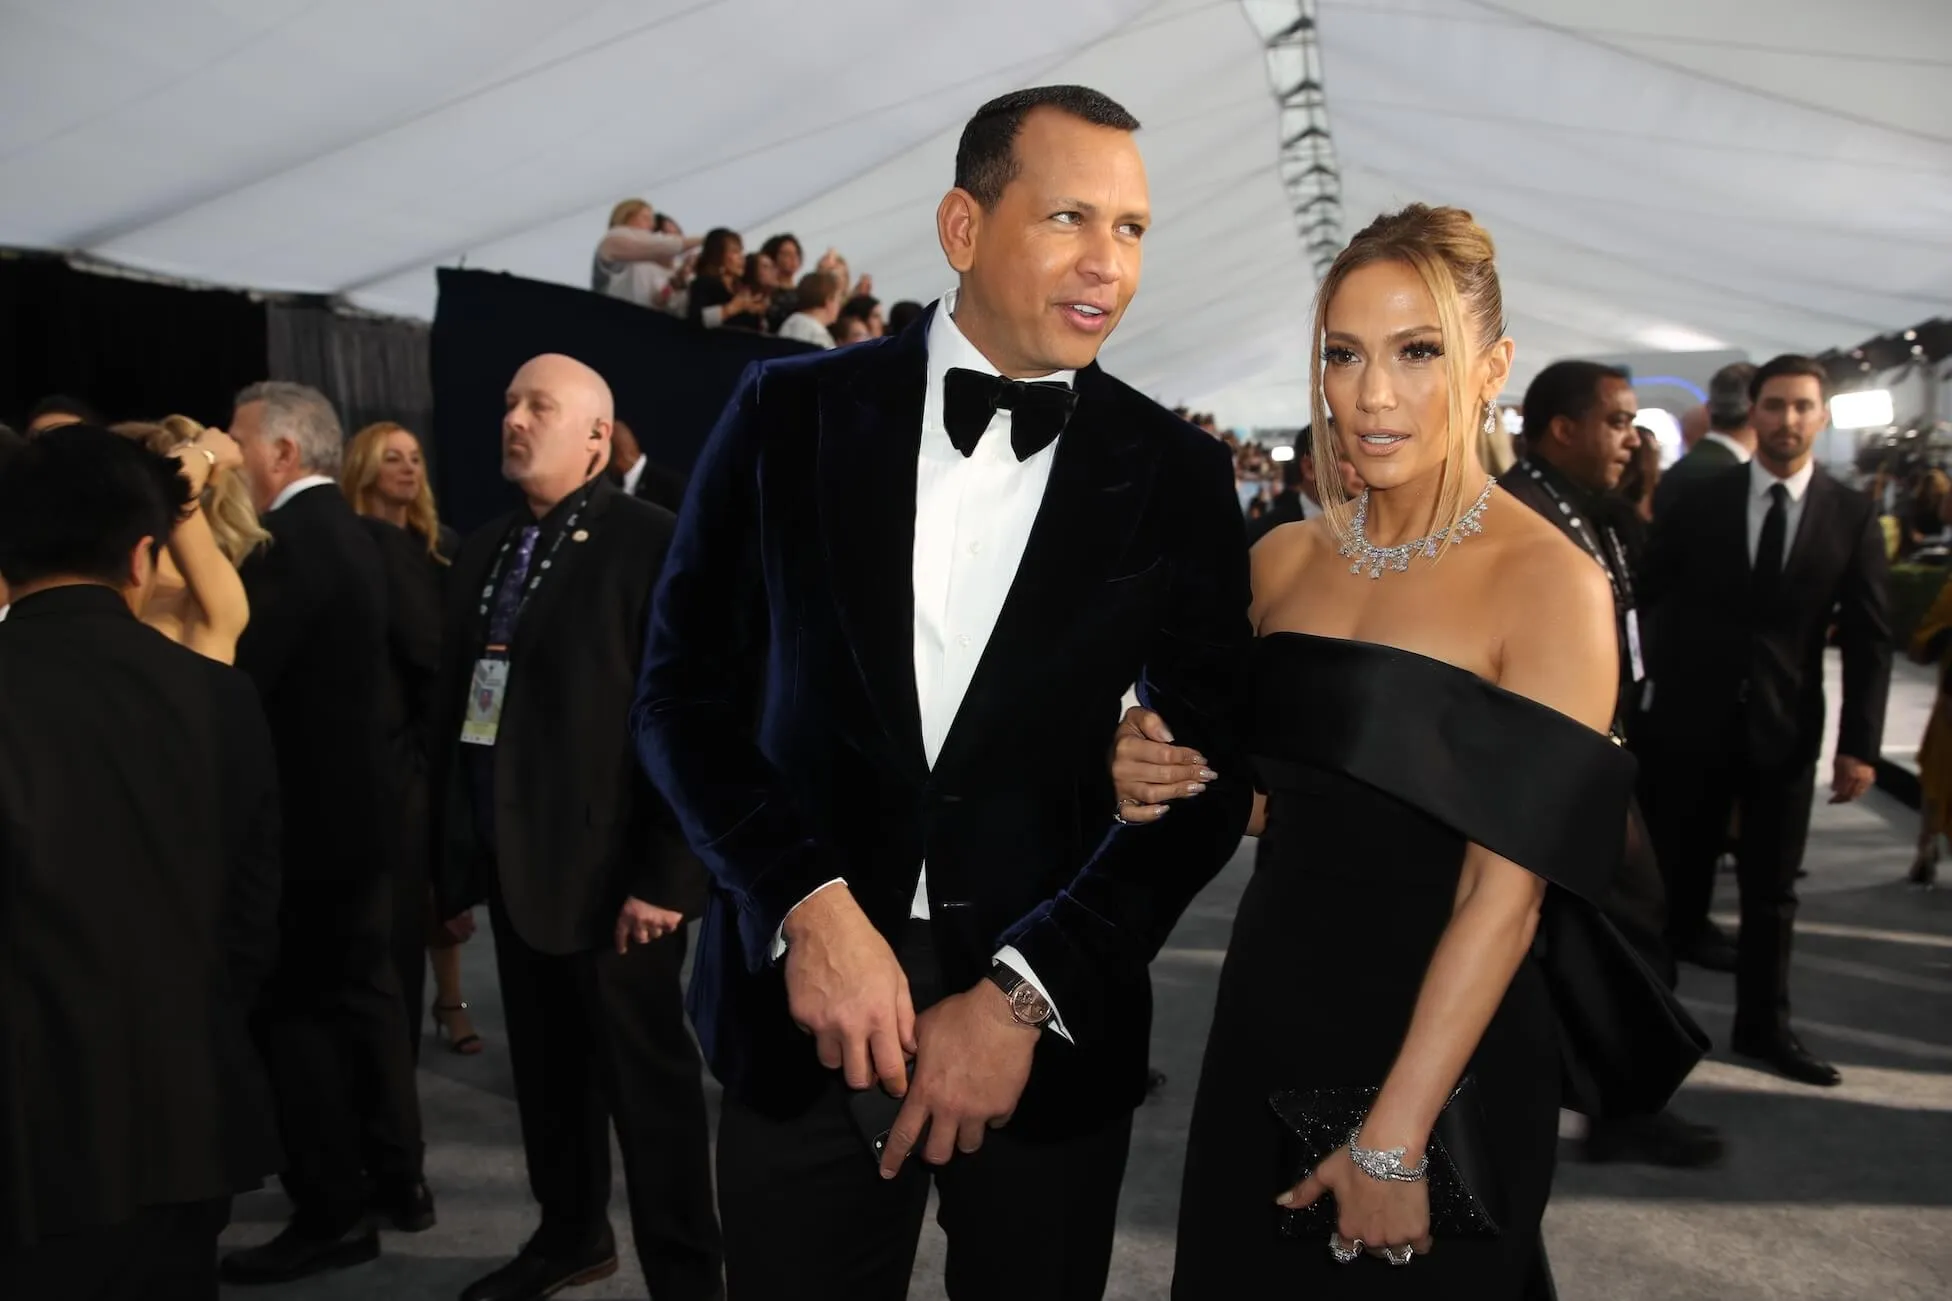 Alex Rodriguez wearing a suit and Jennifer Lopez wearing a black dress while arriving at the 26th Screen Actors Guild Awards in 2020